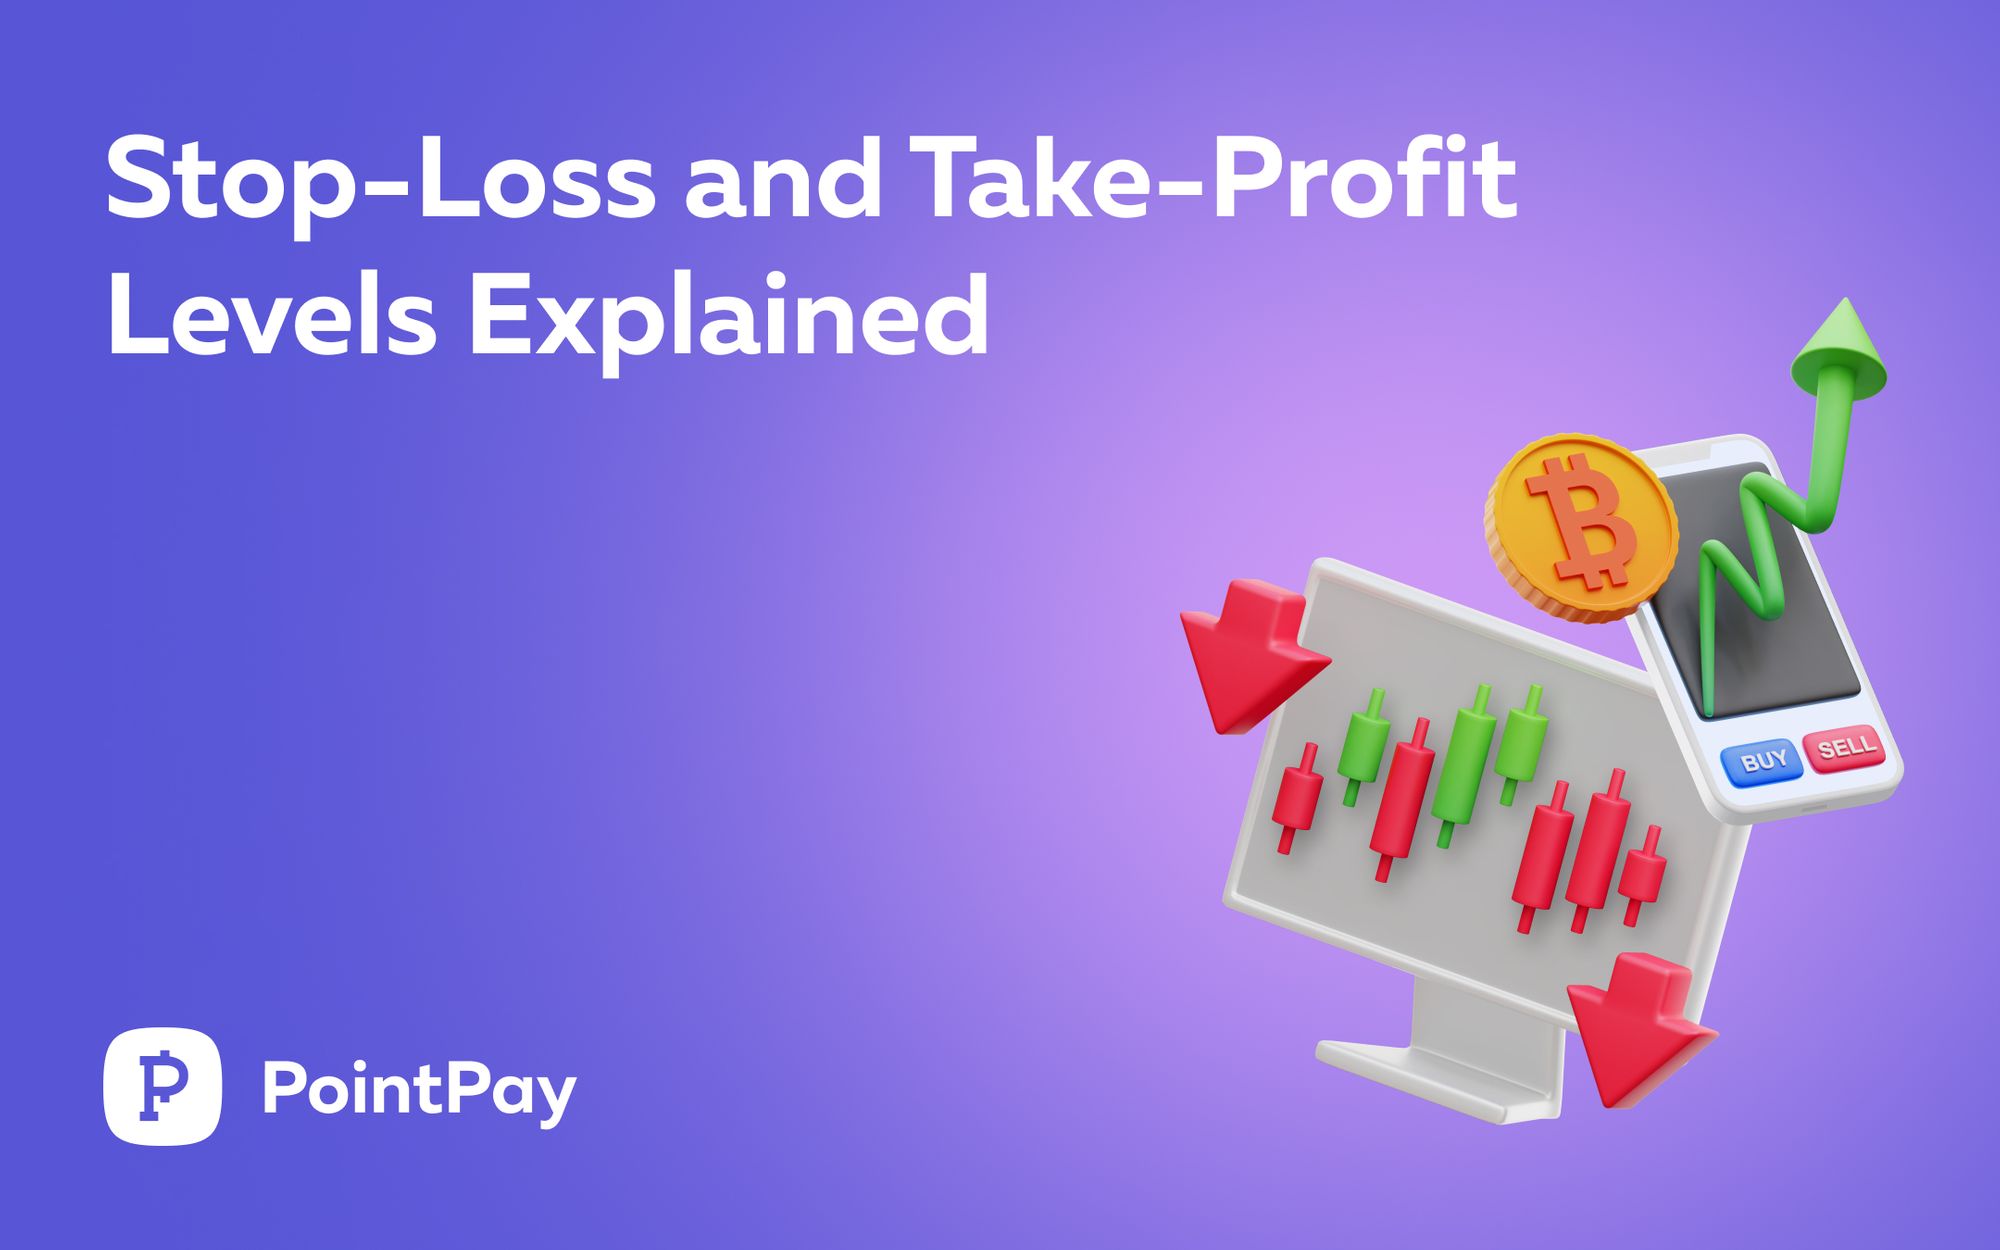 What Are Stop-Loss and Take-Profit Levels and How to Calculate Them?